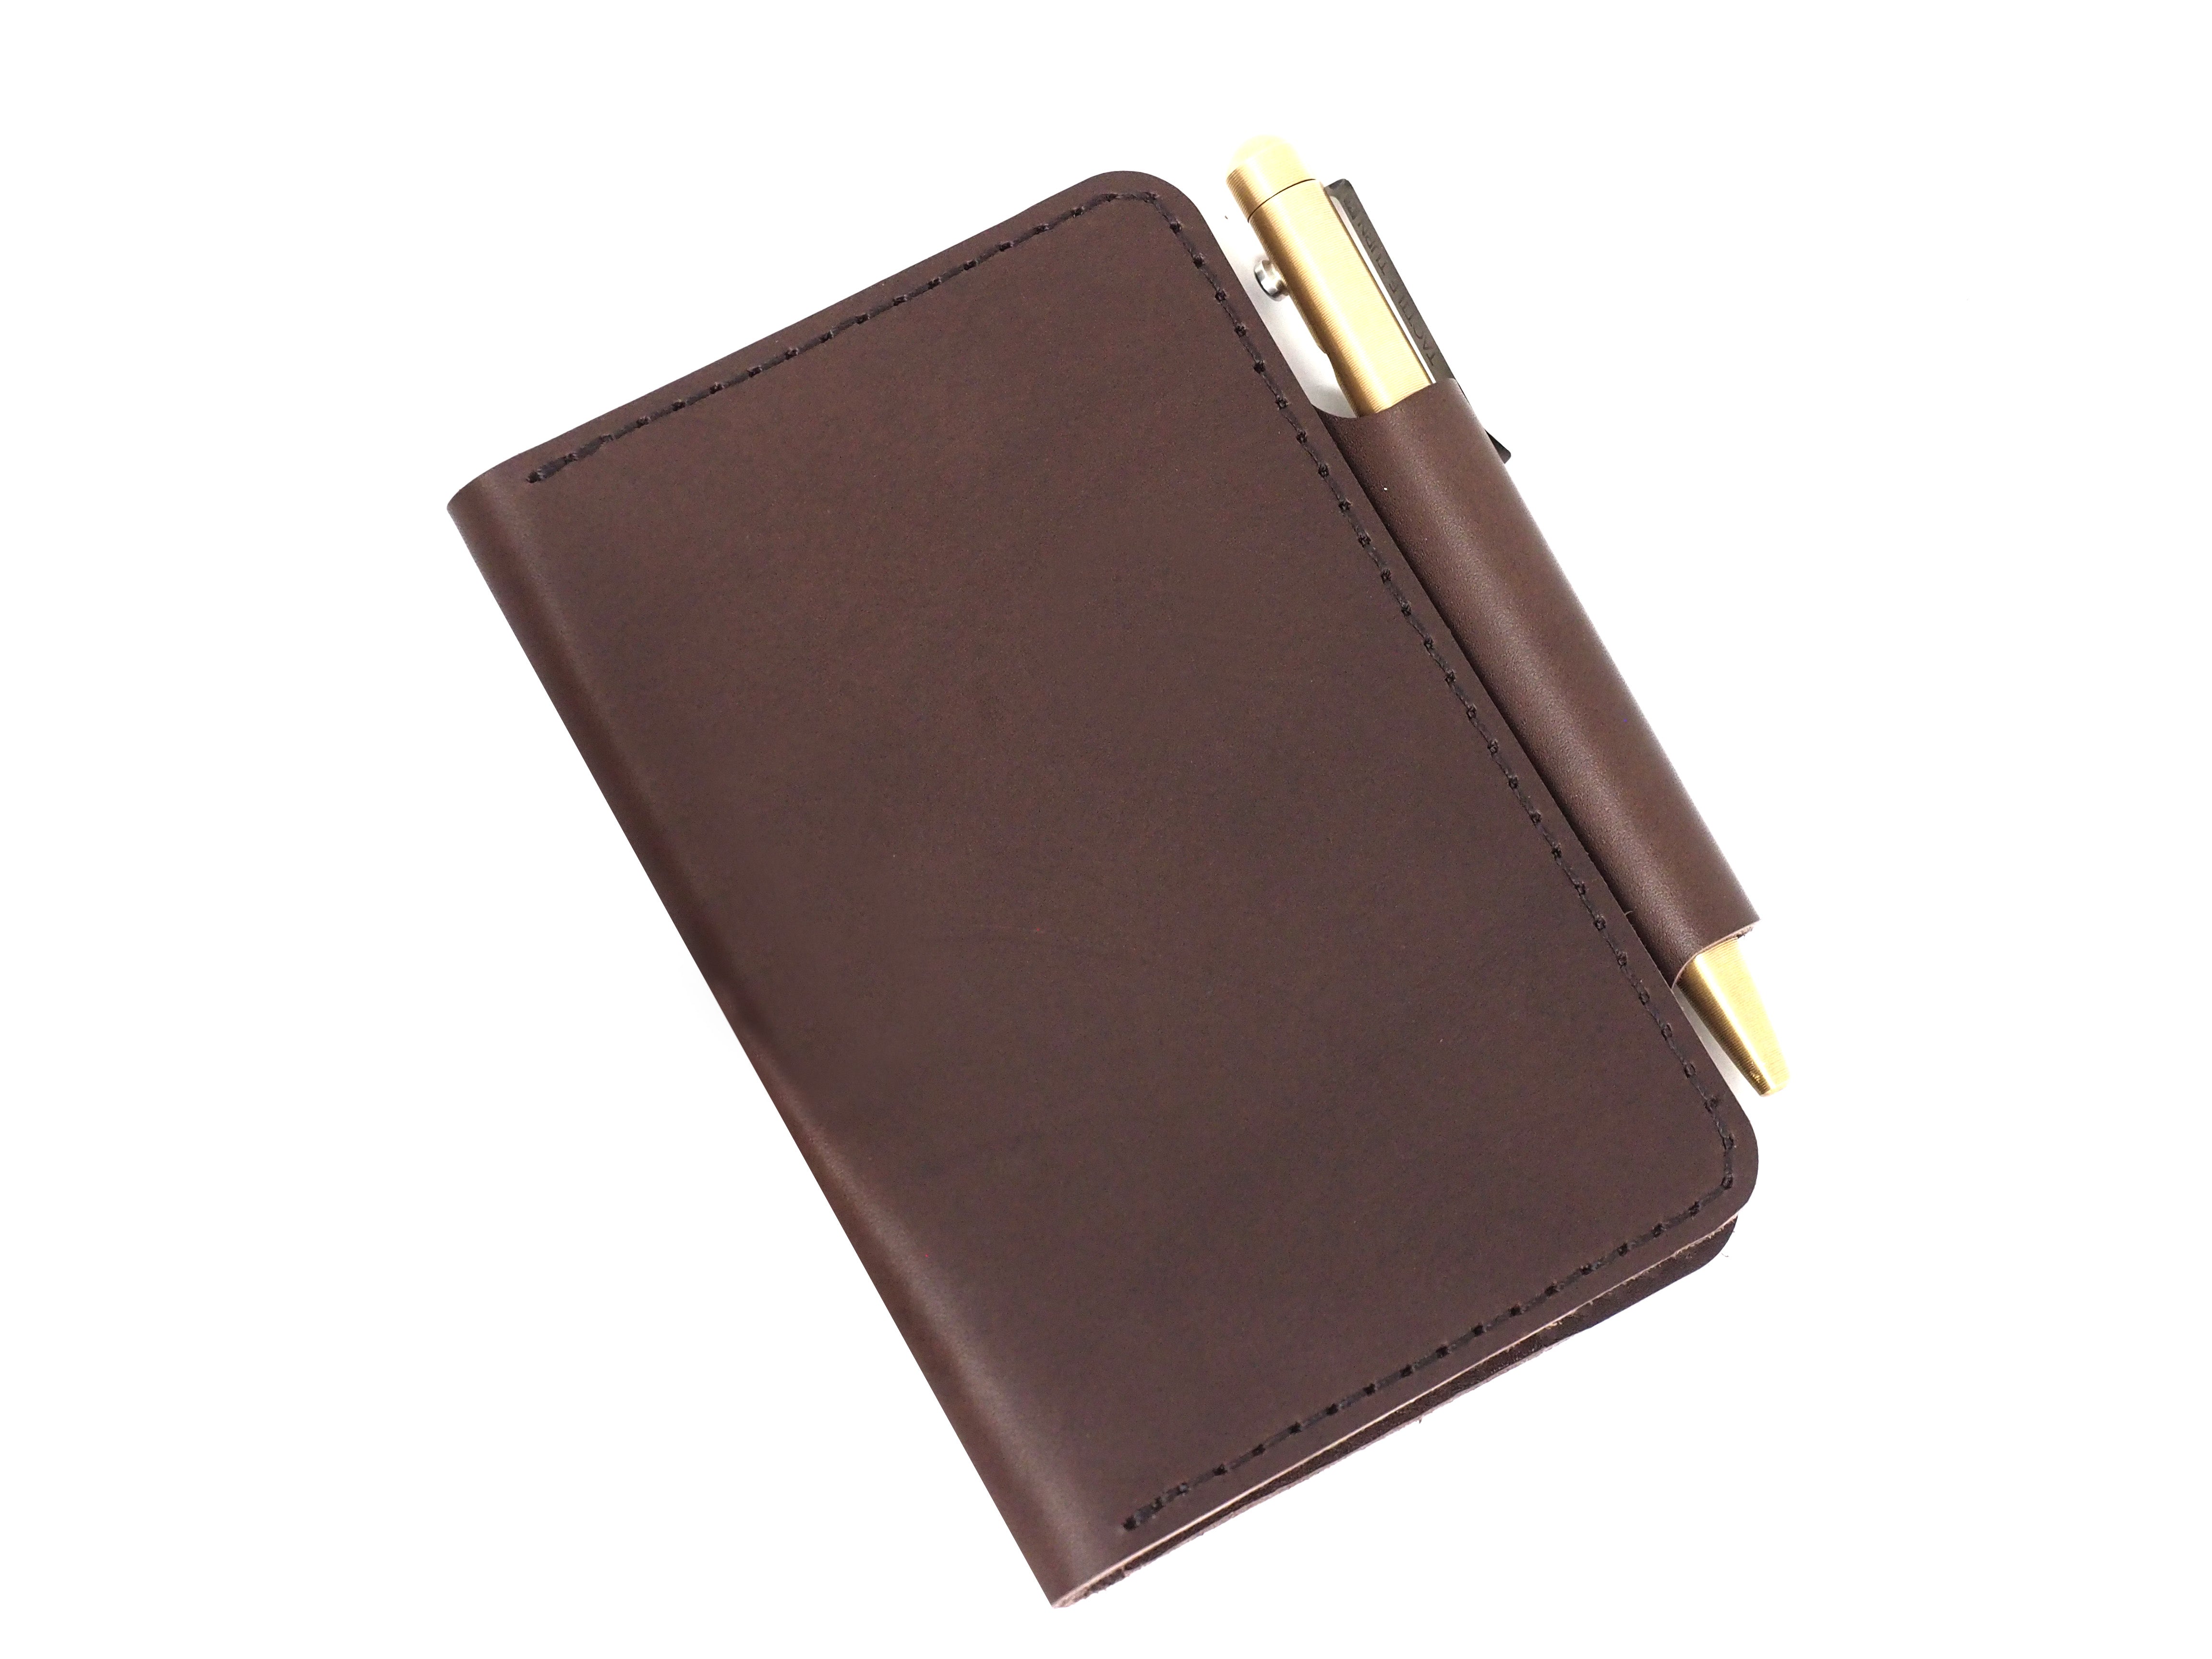 Field Notes & Passport Cover – Marlondo Leather Co.